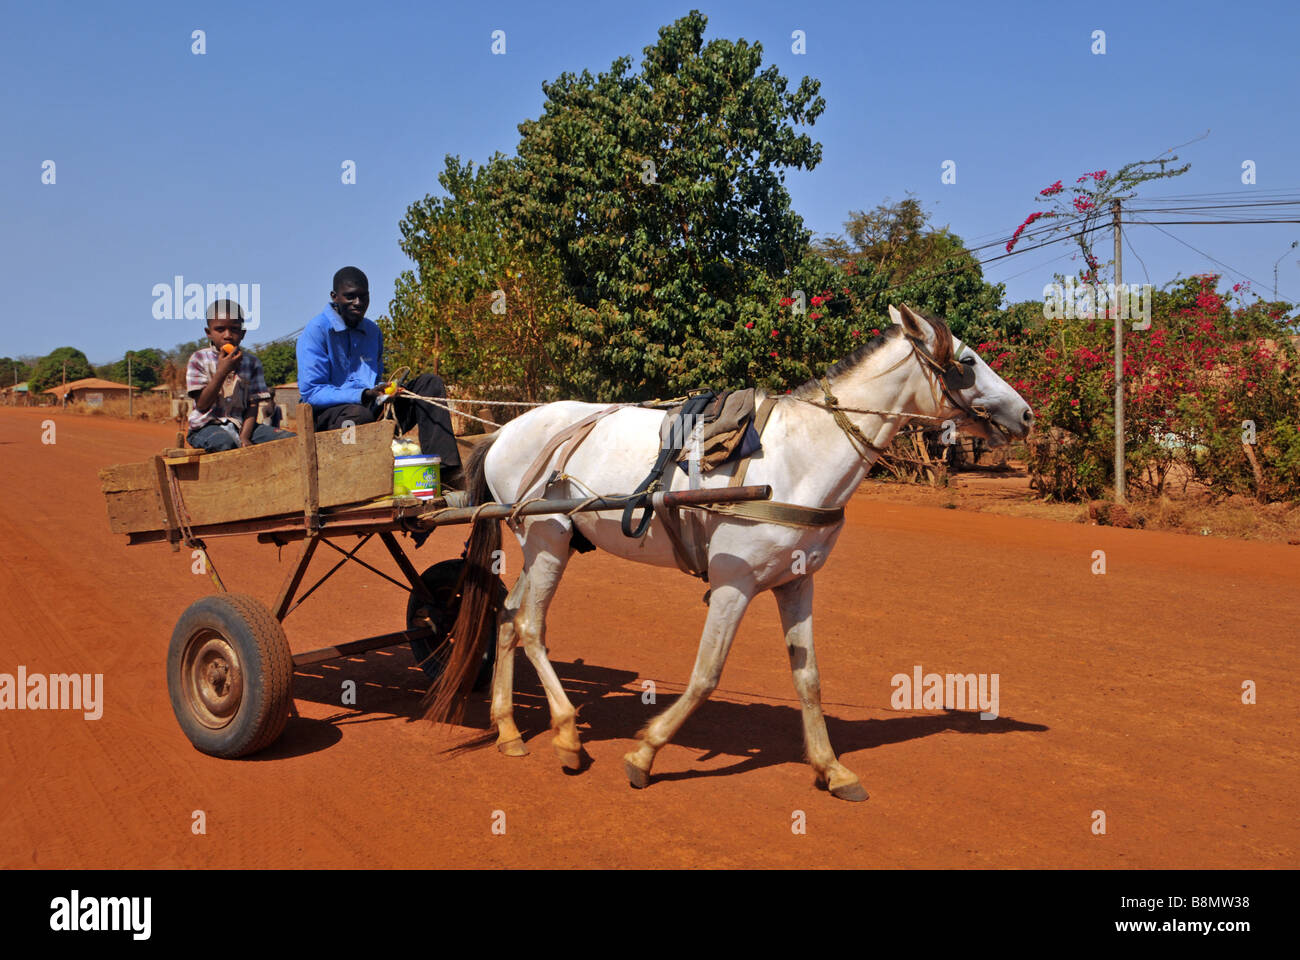 Horse and cart in the village of Bwiam, The Gambia “West Africa” Stock Photo